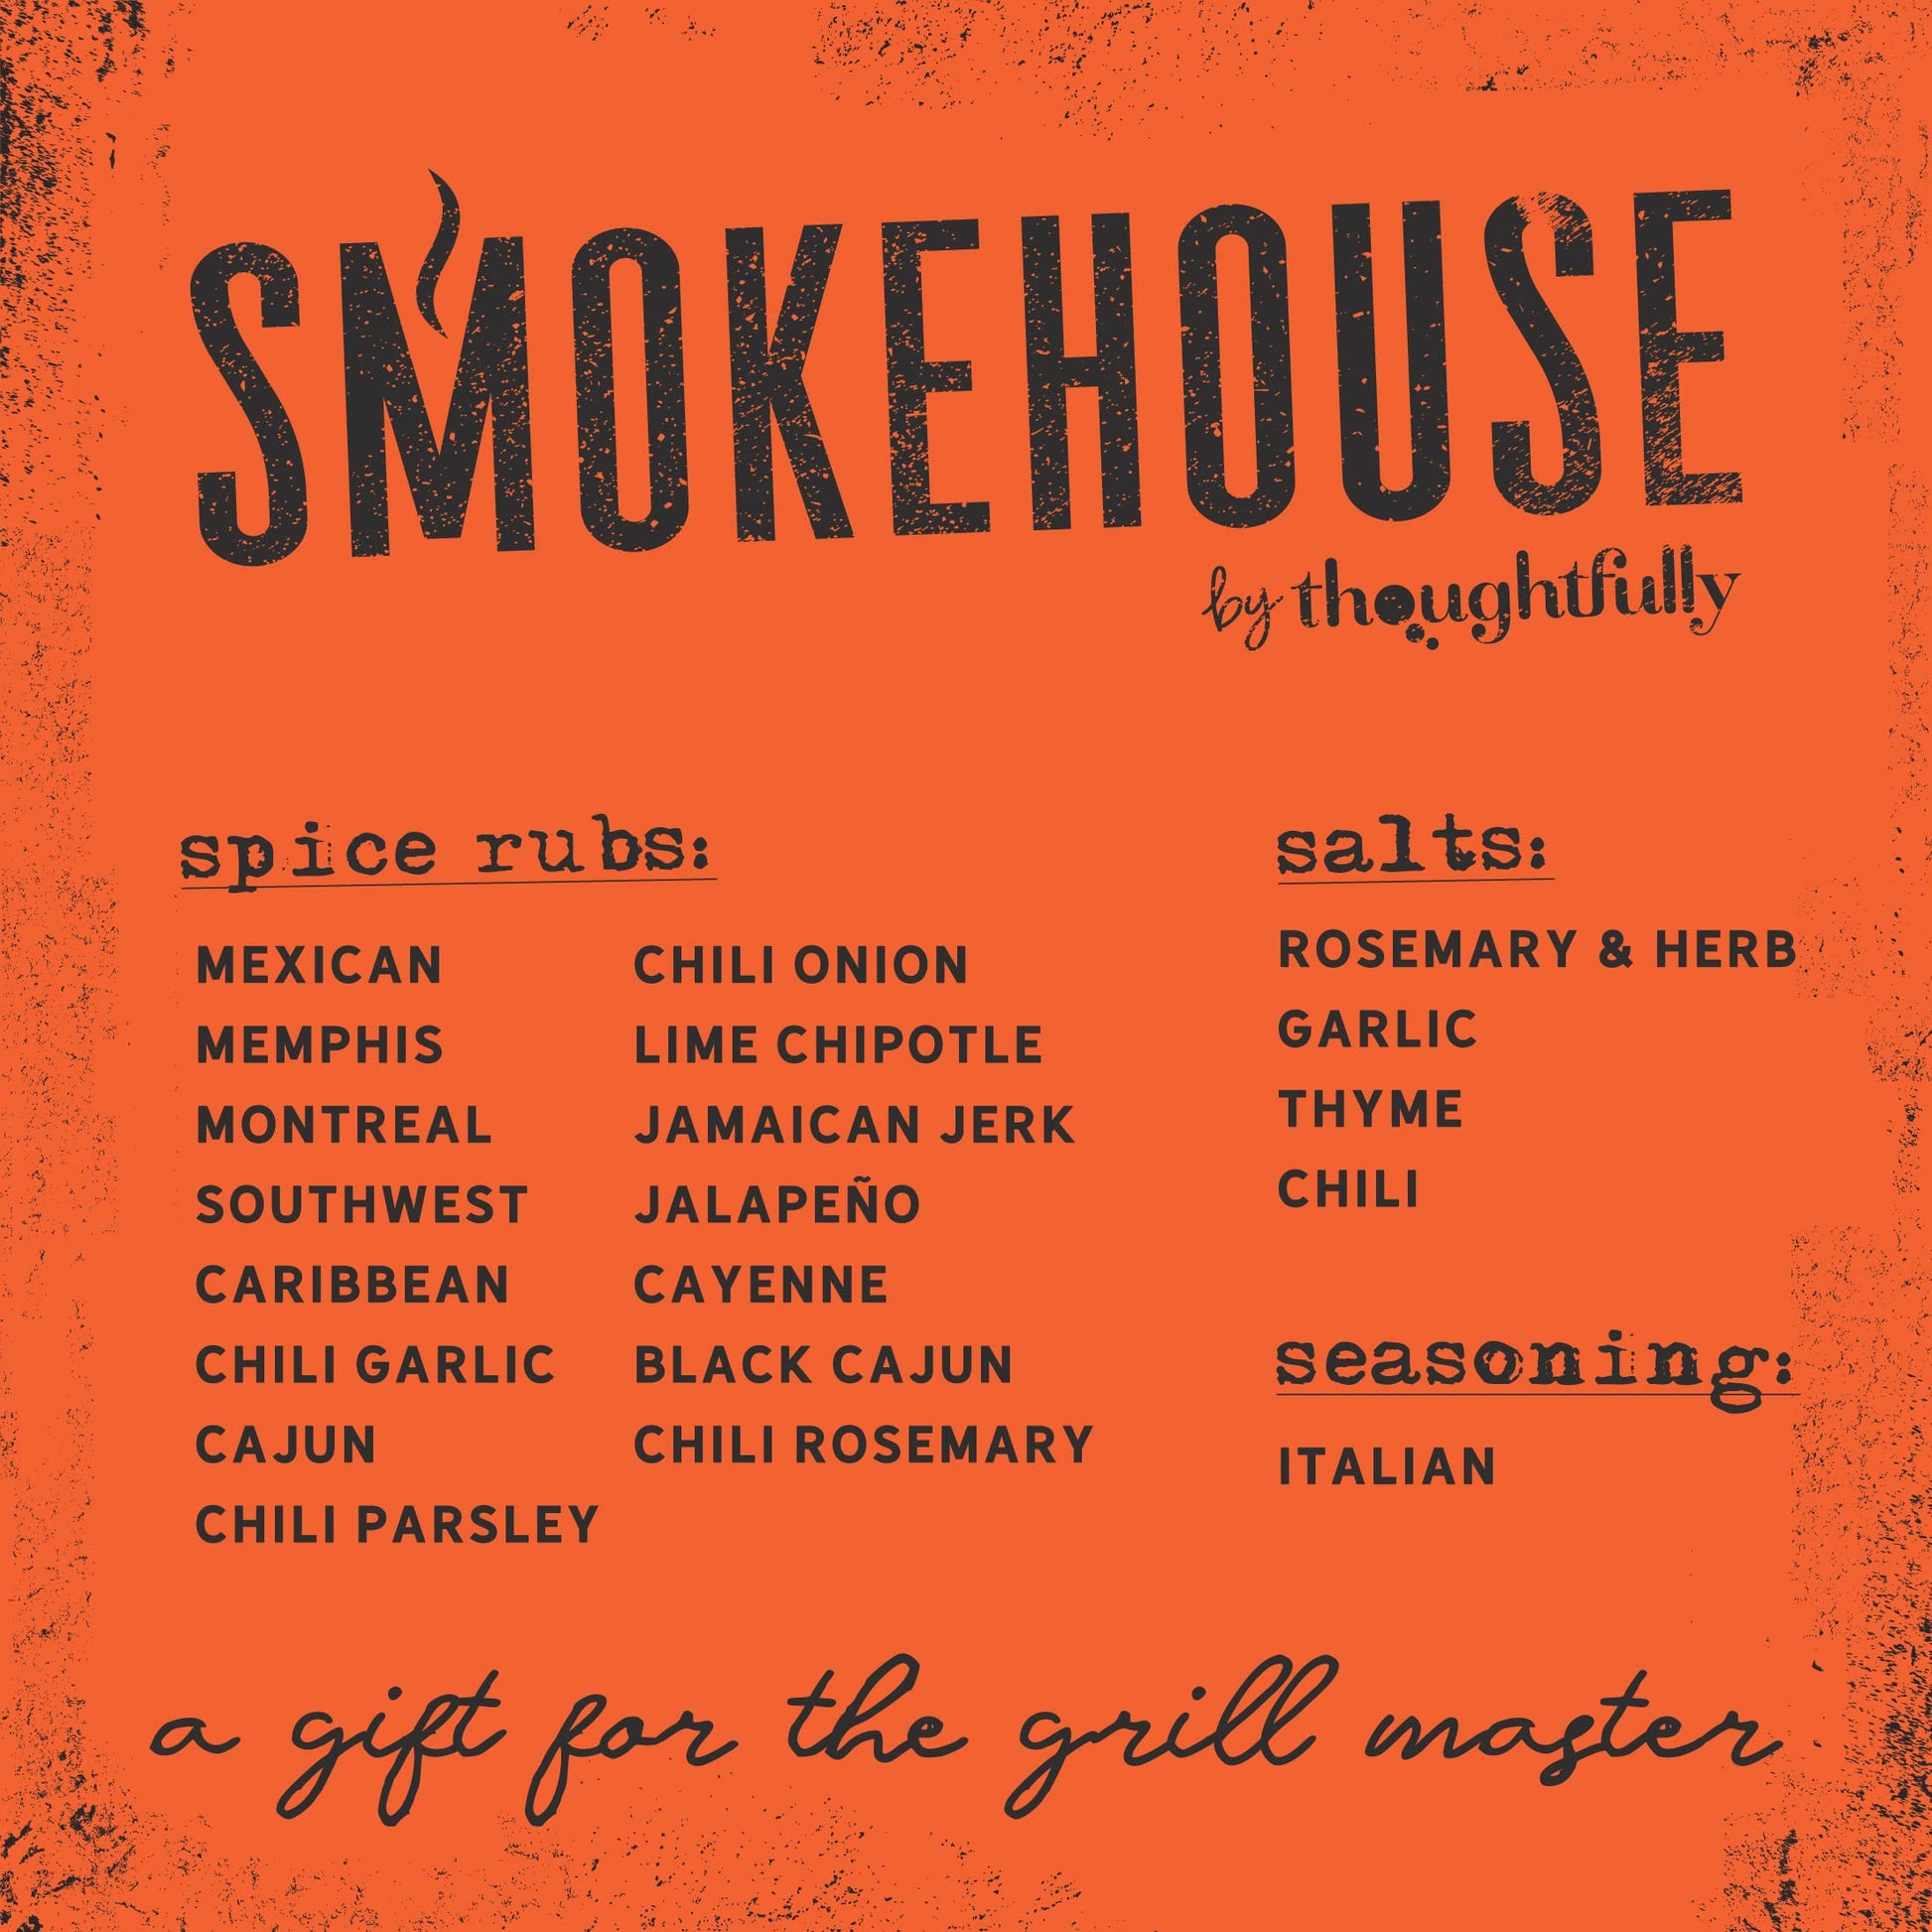 Smokehouse list of flavours